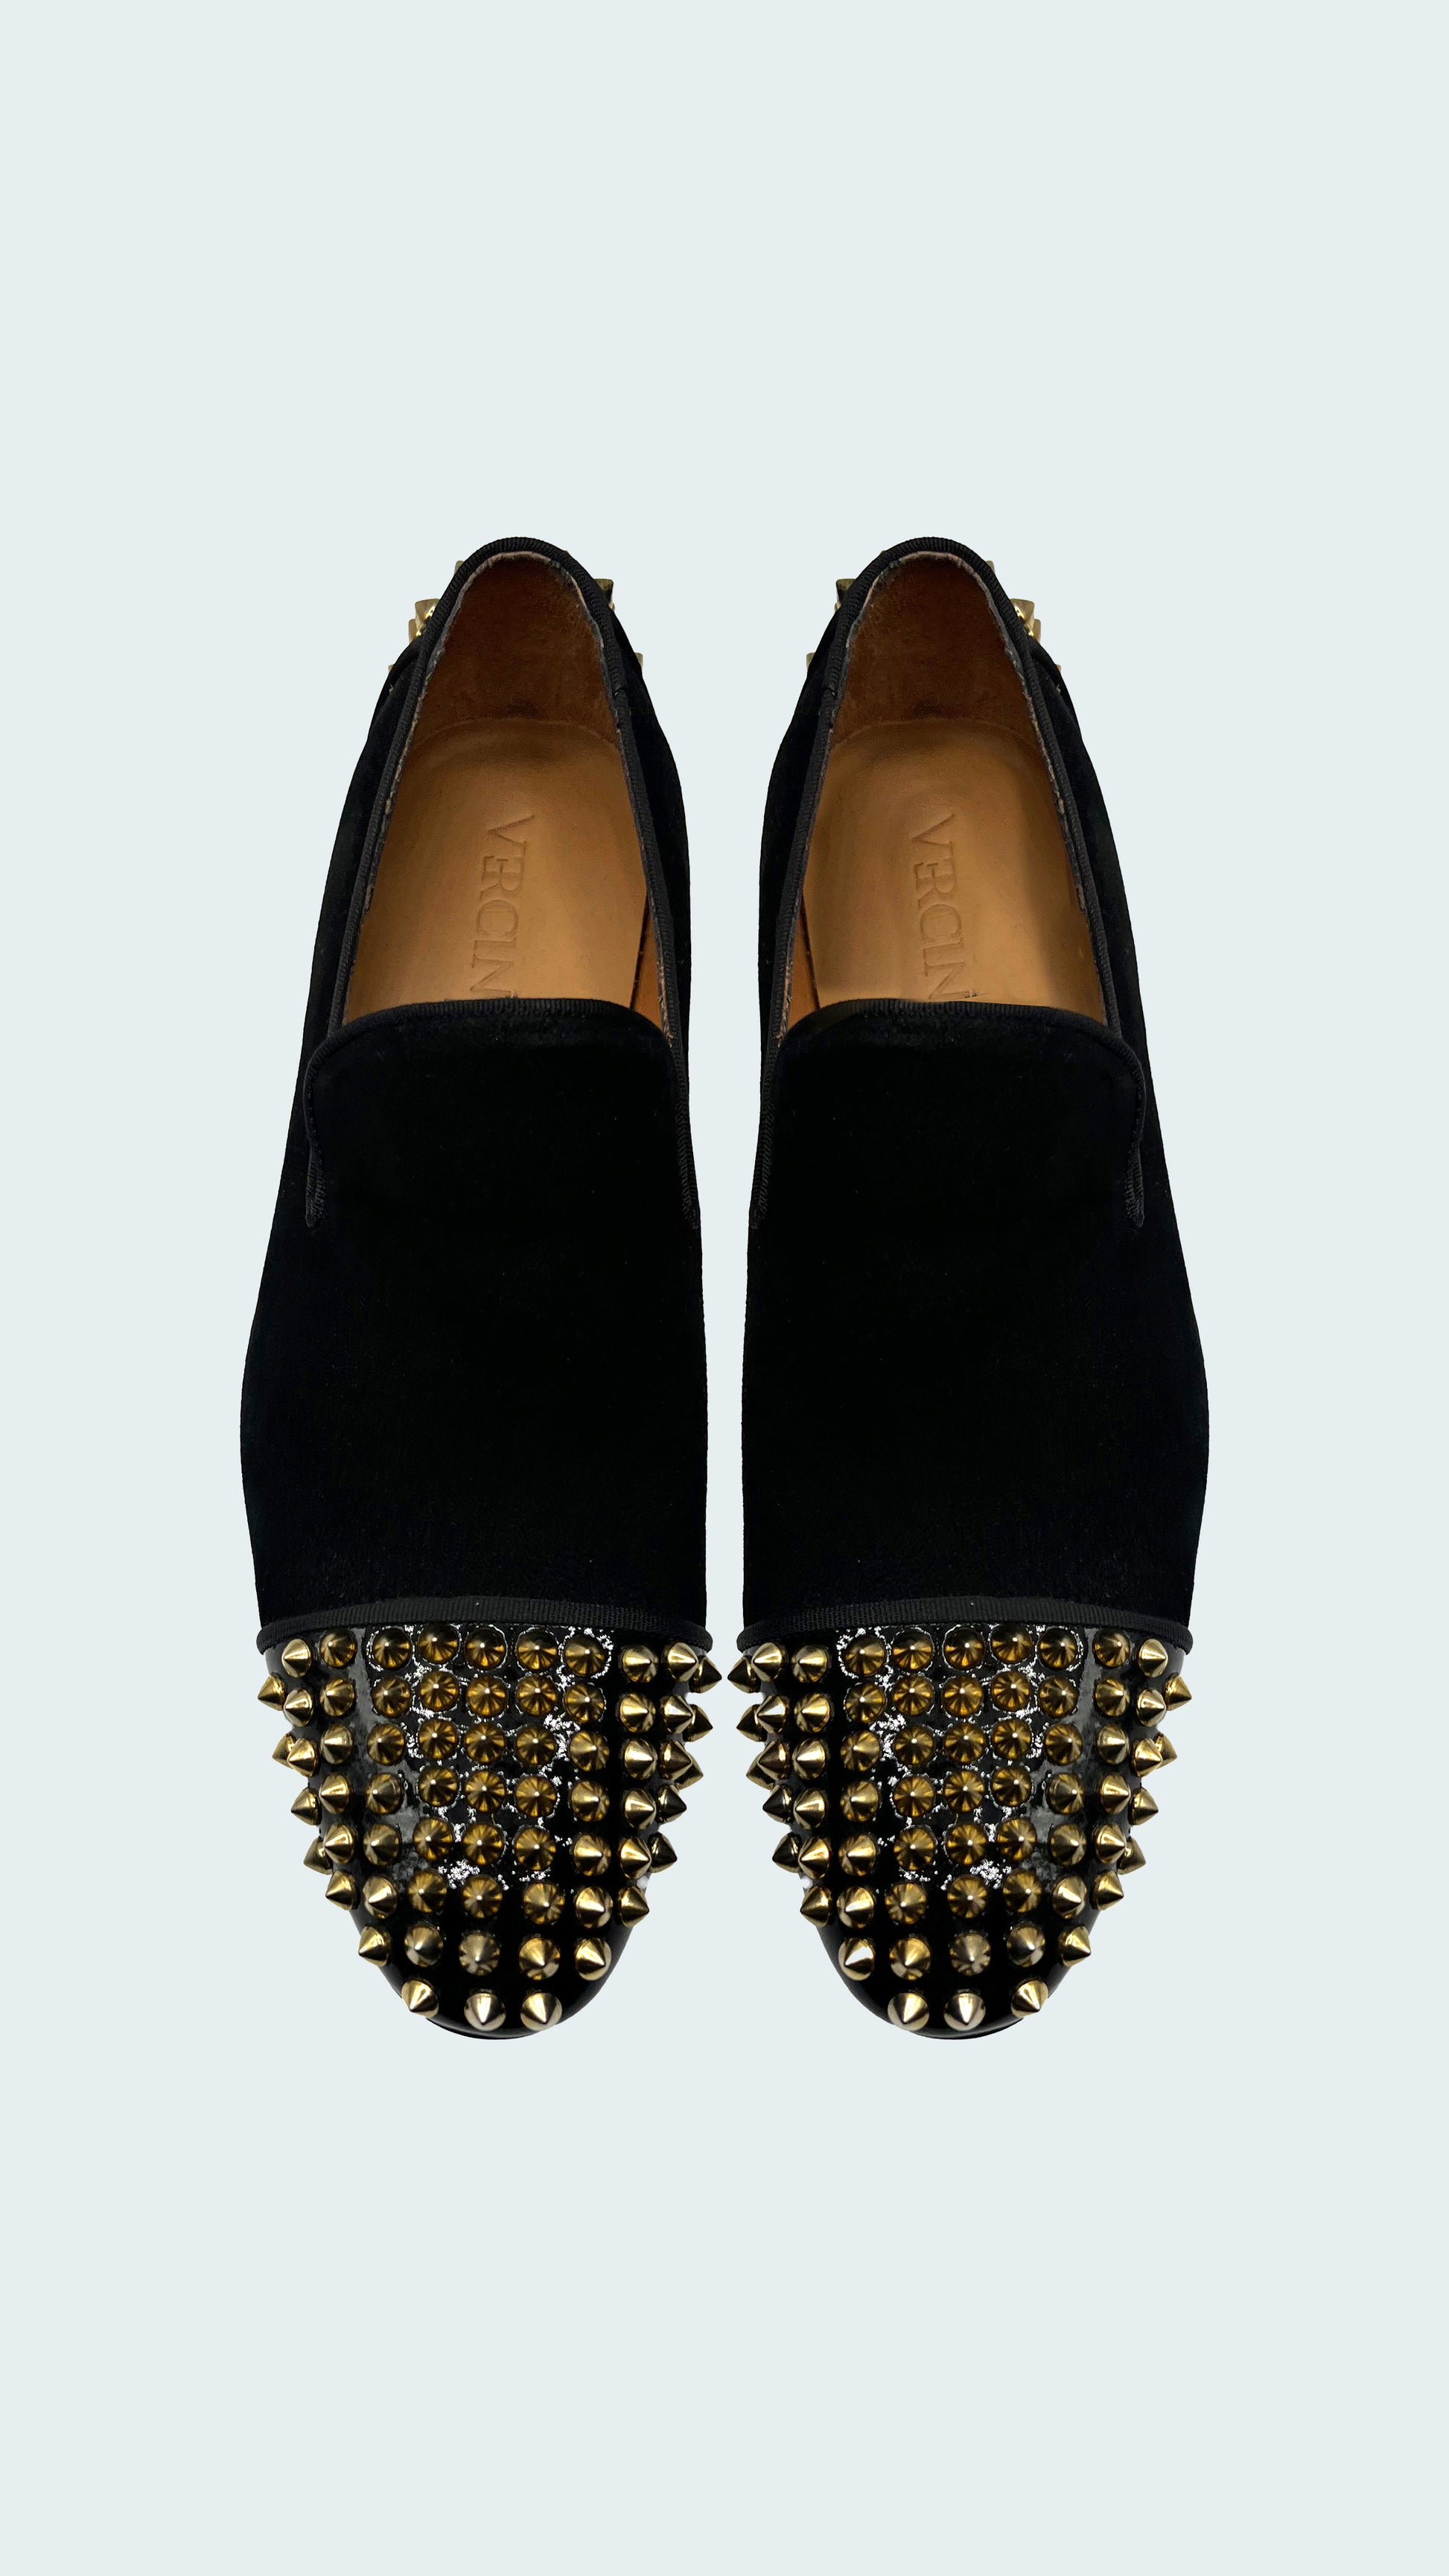 Men's Black Suede Loafers with Bold Gold Spiked Embellishments by Vercini LOAFERS Ph inventory shoes Vercini